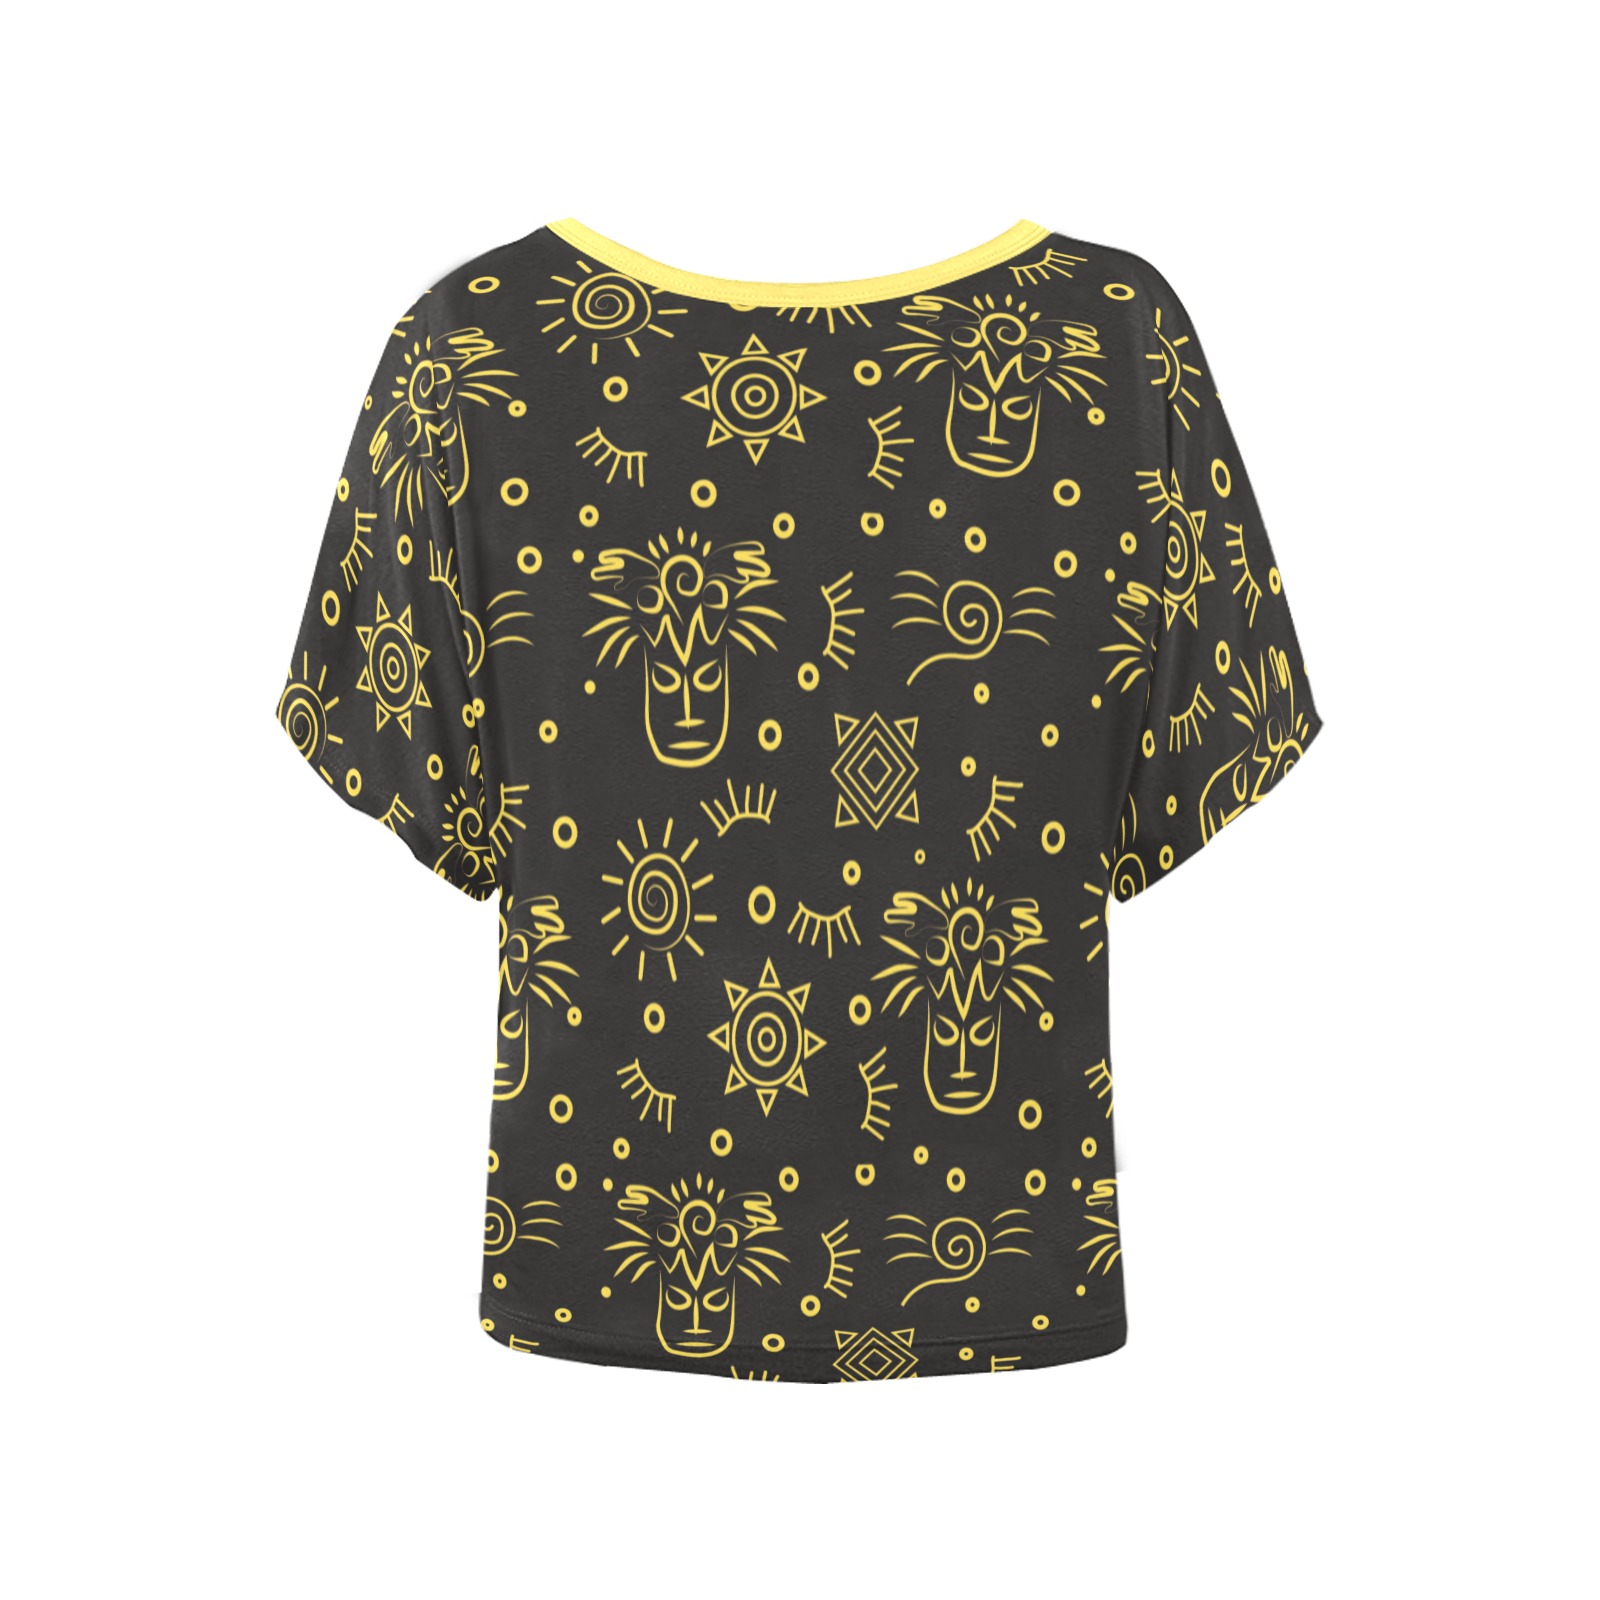 African patterns -11 Women's Batwing-Sleeved Blouse T shirt (Model T44)